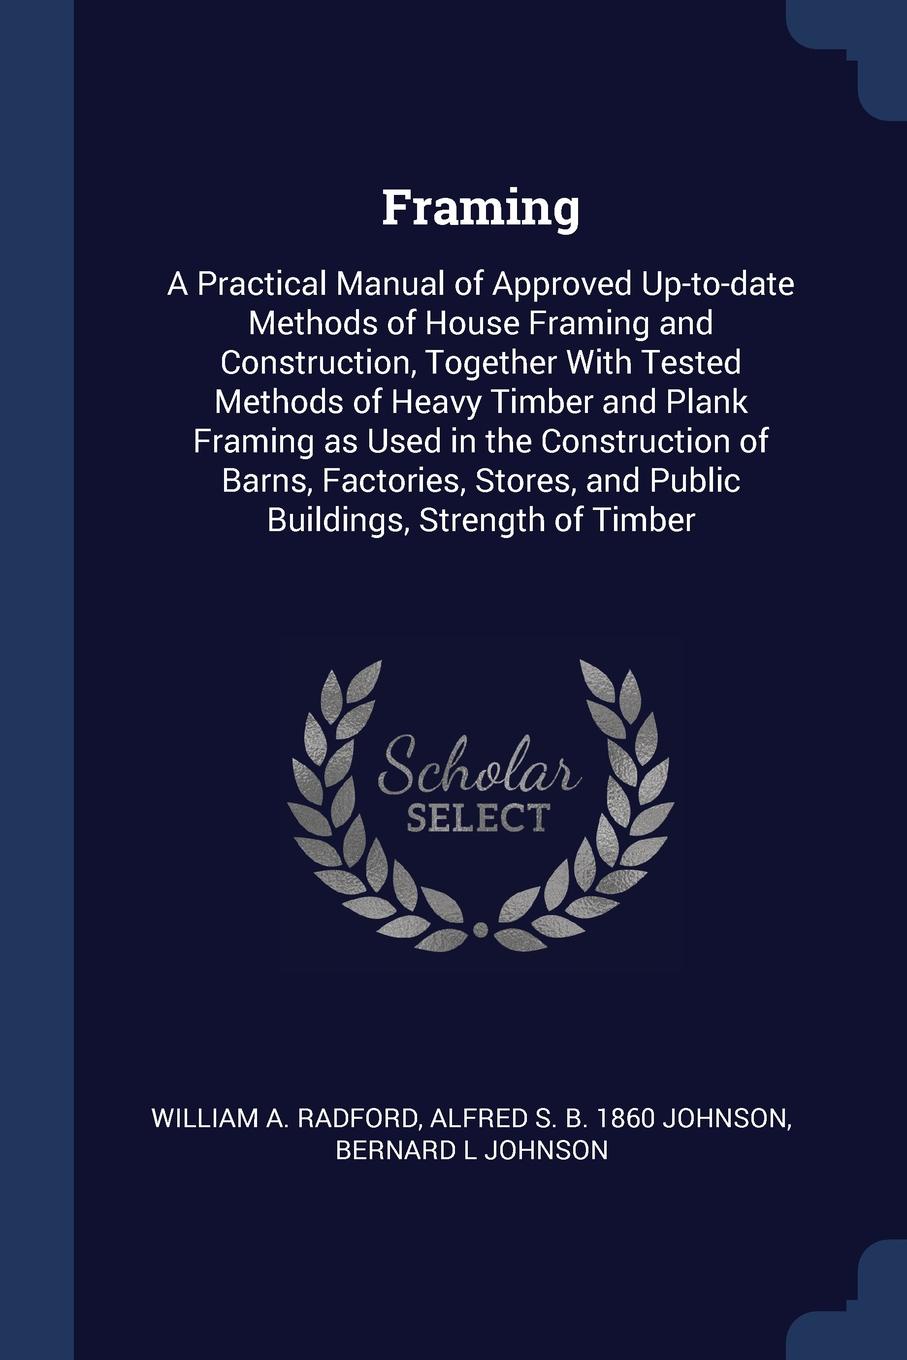 Framing. A Practical Manual of Approved Up-to-date Methods of House Framing and Construction, Together With Tested Methods of Heavy Timber and Plank Framing as Used in the Construction of Barns, Factories, Stores, and Public Buildings, Strength of...